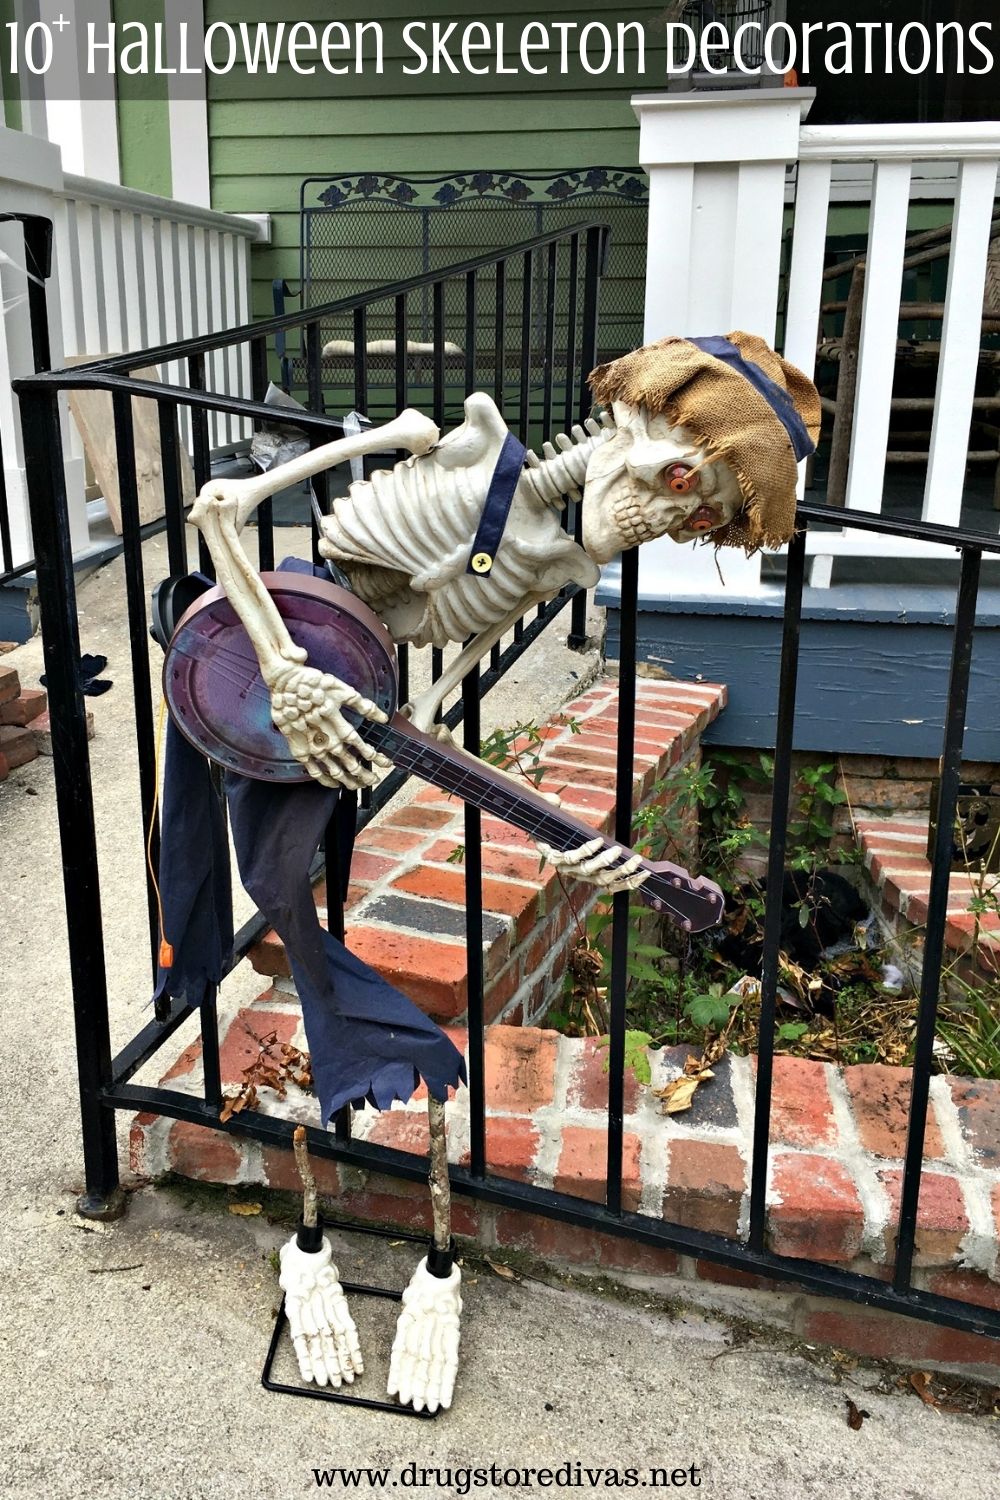 A skeleton Halloween decoration holding a bango with the words 